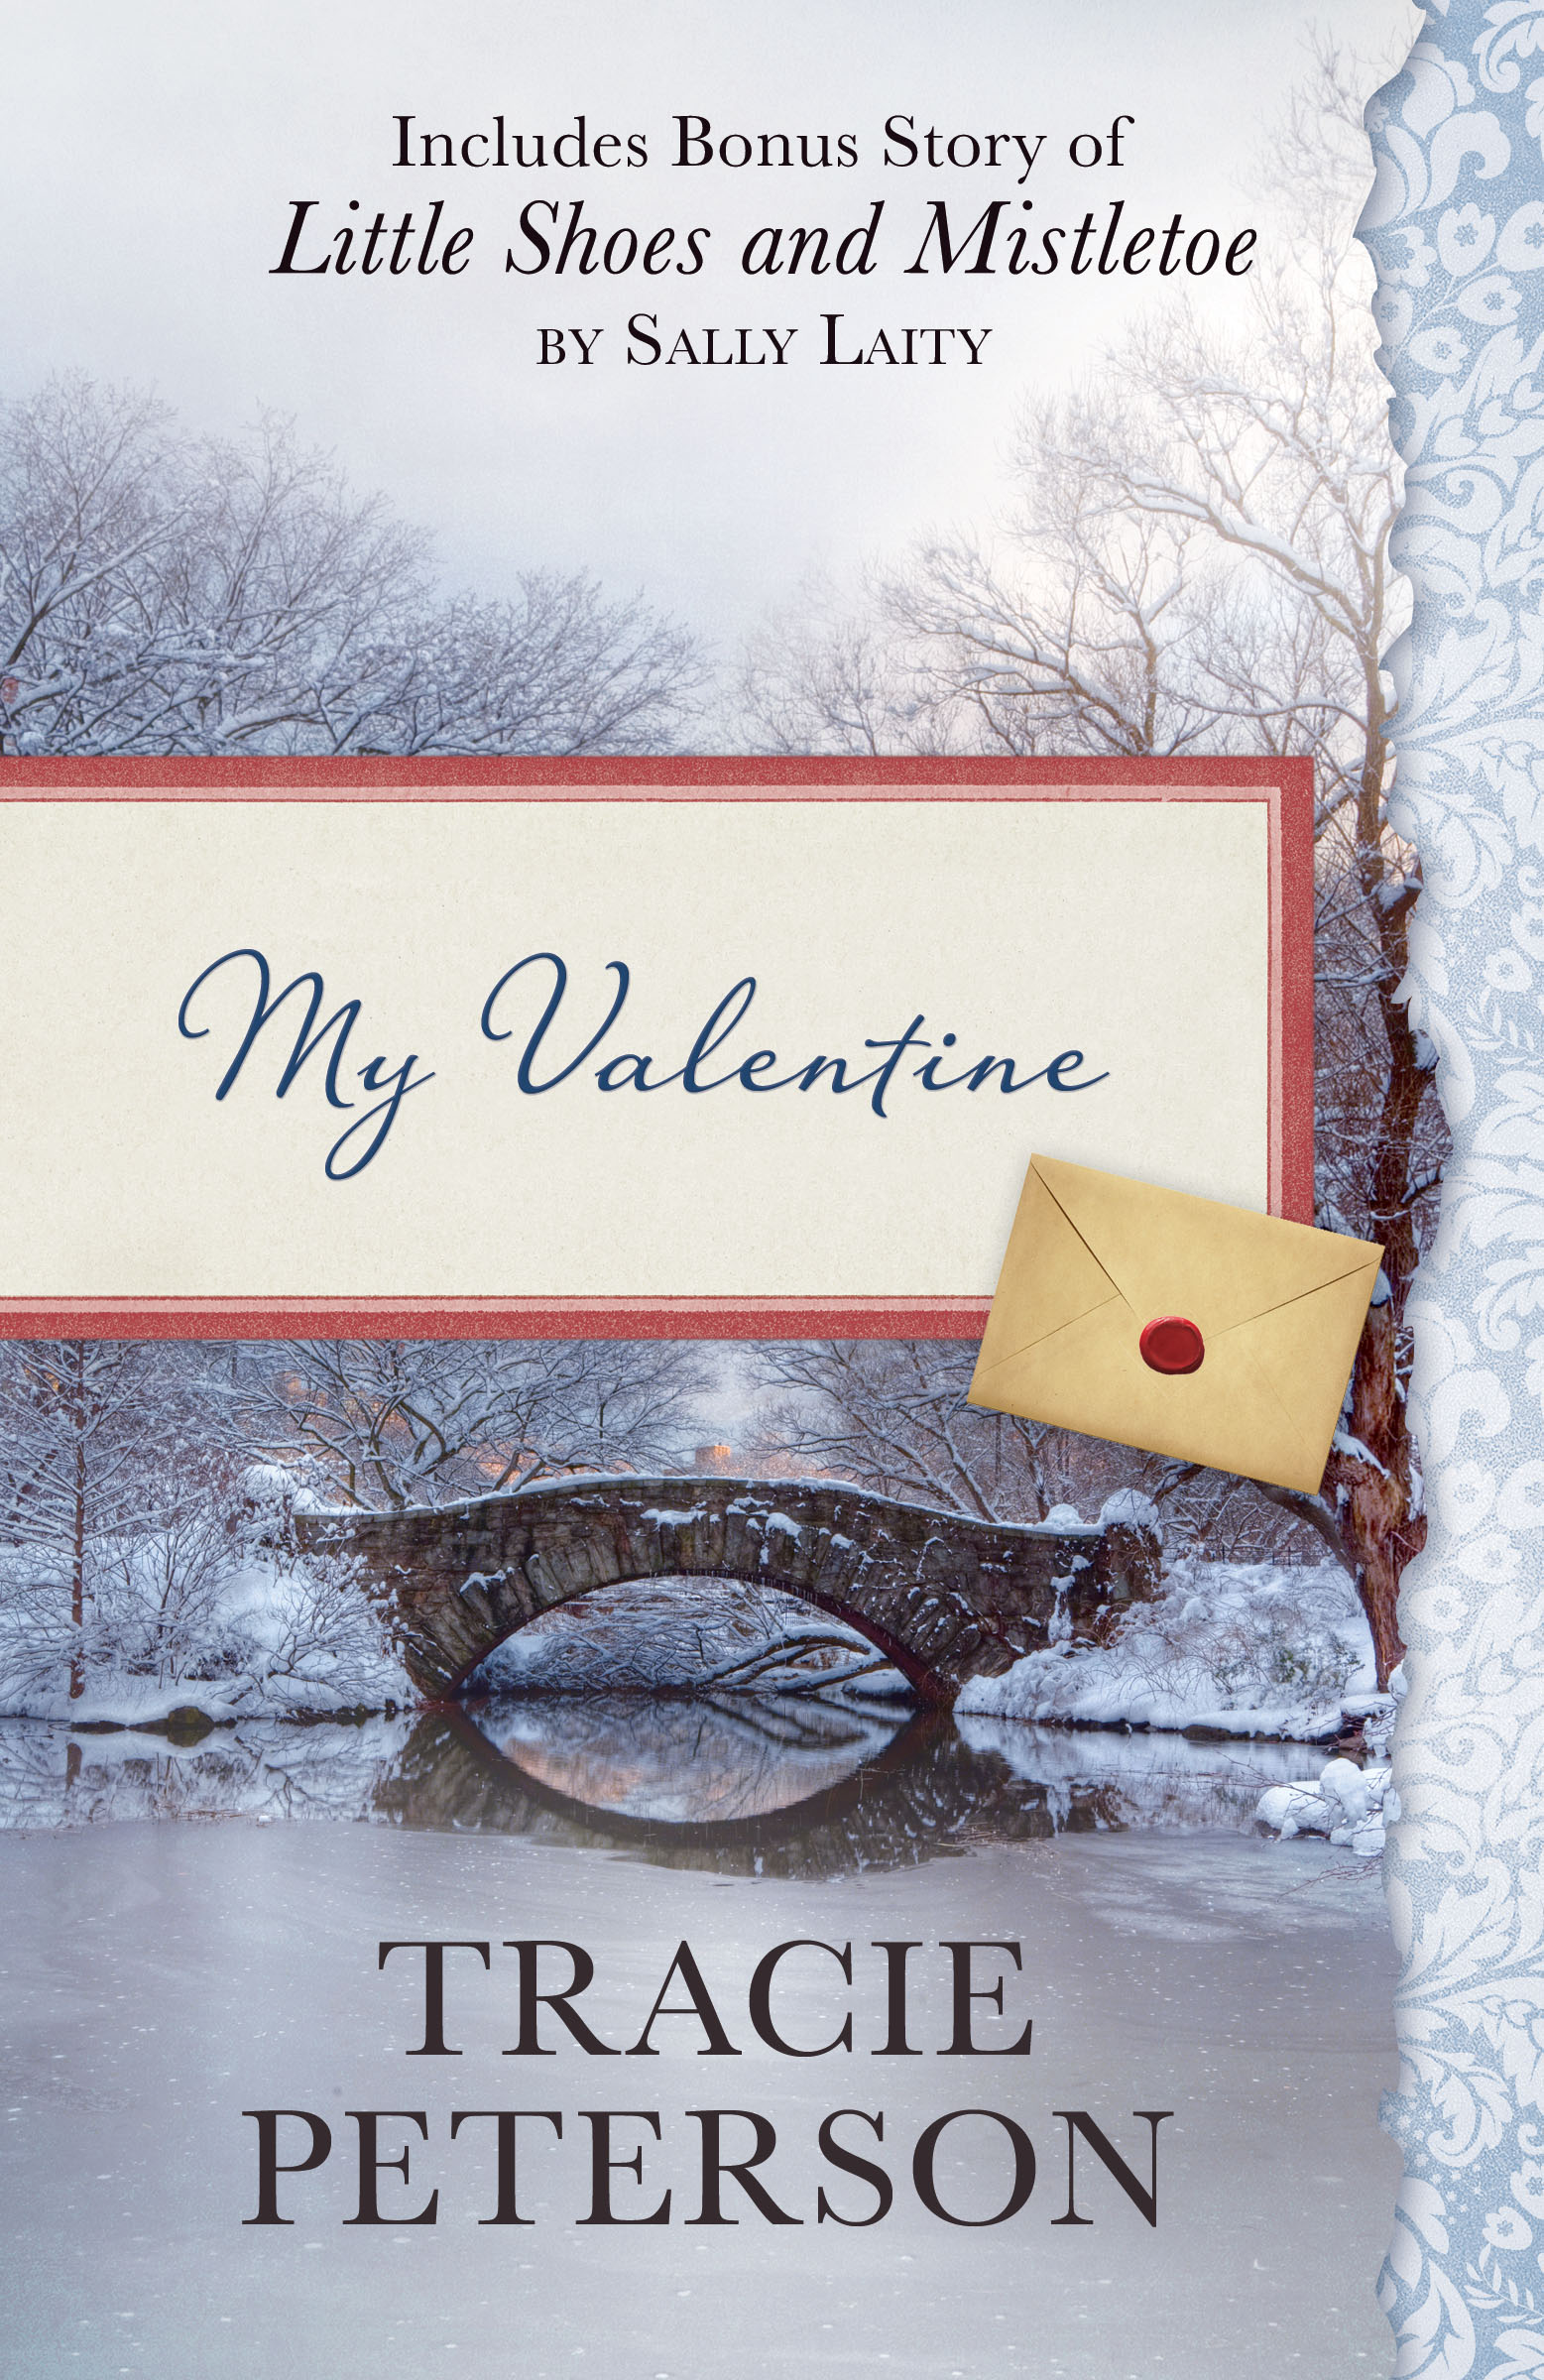 Imagen de portada para My Valentine [electronic resource] : Also Includes Bonus Story of Little Shoes and Mistletoe by Sally Laity